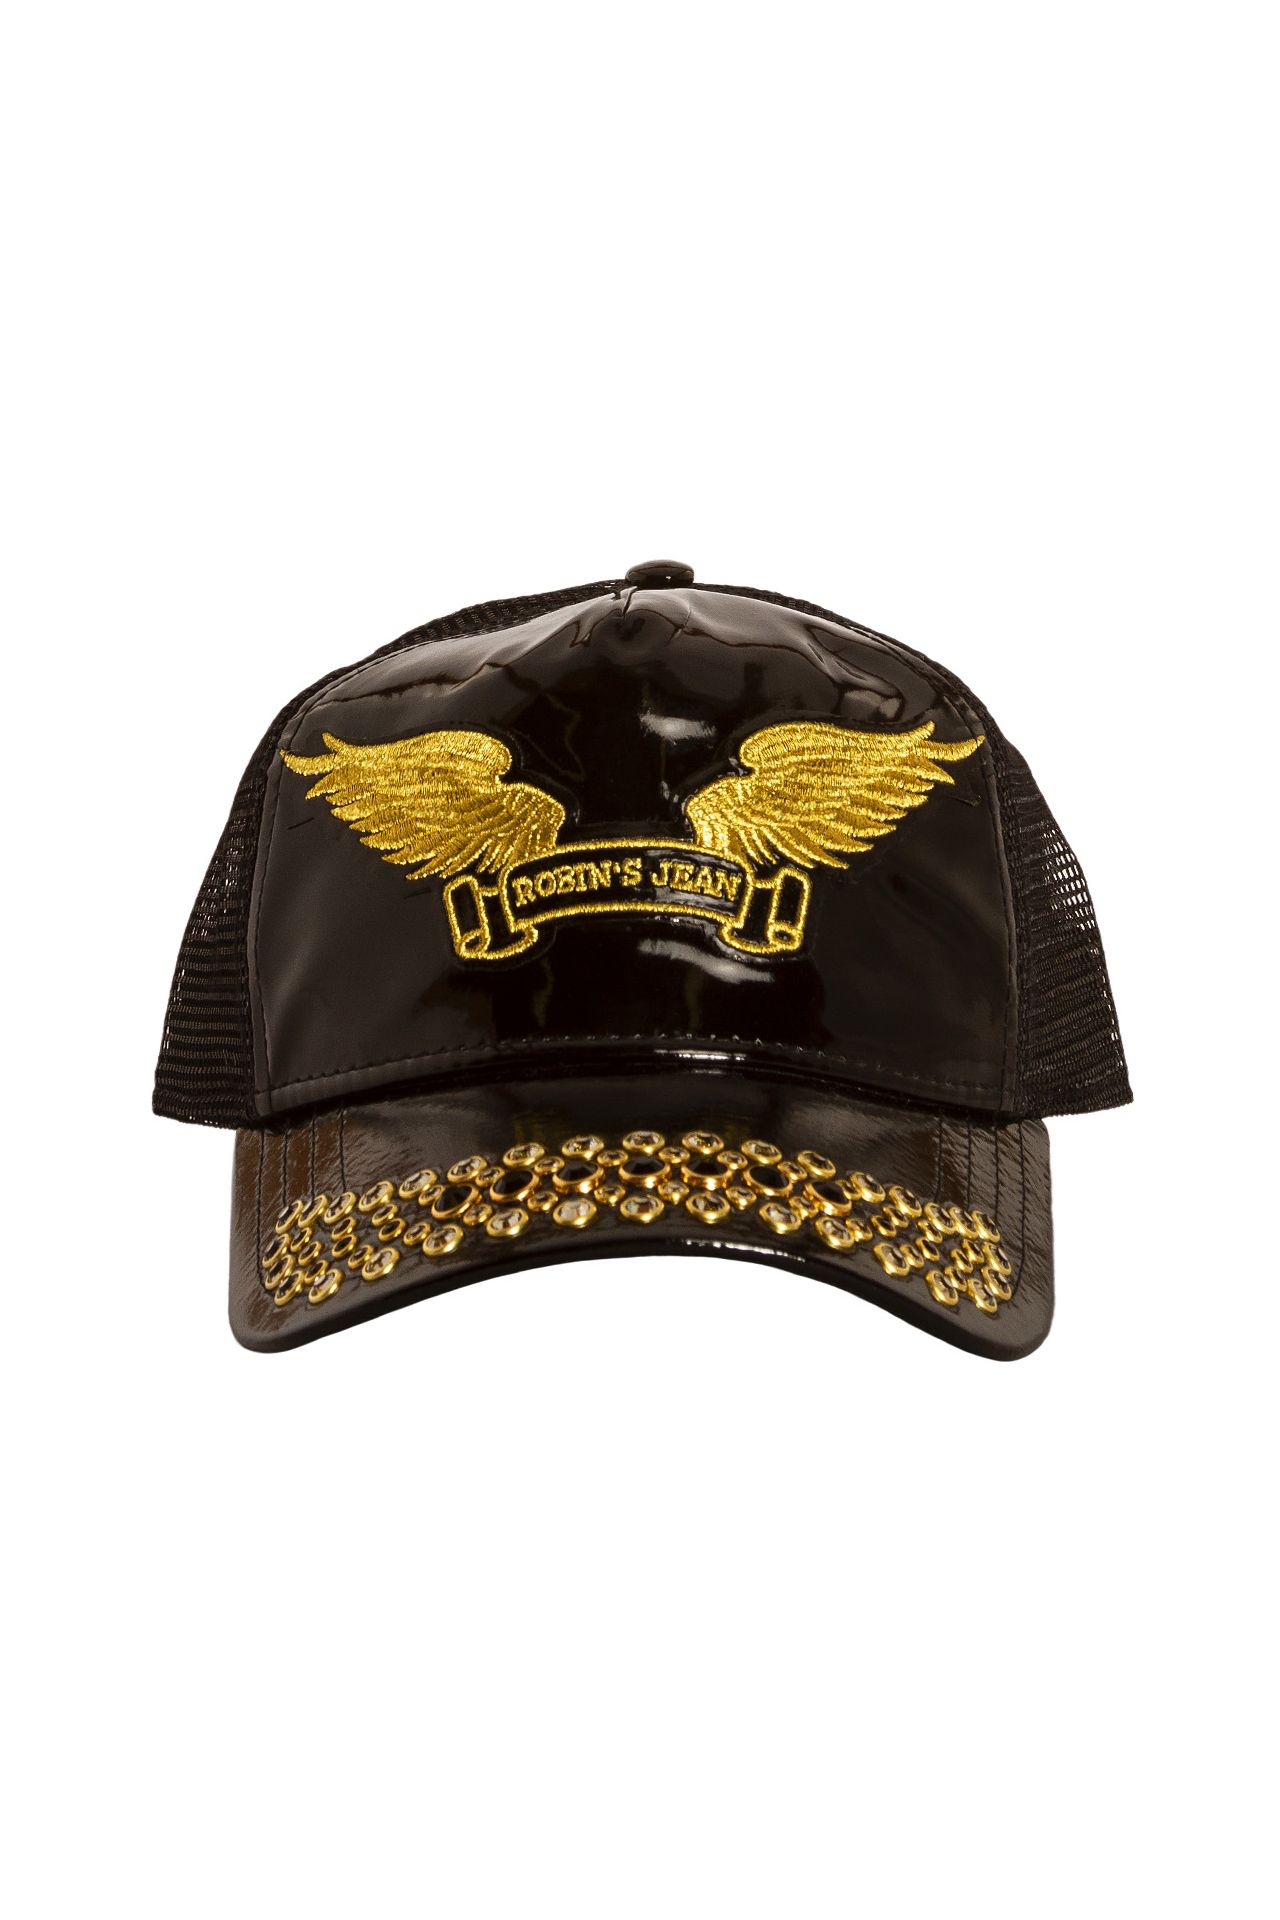 TRUCKER CAP IN PATENT BLACK WITH GOLD WINGS AND CRYSTALS